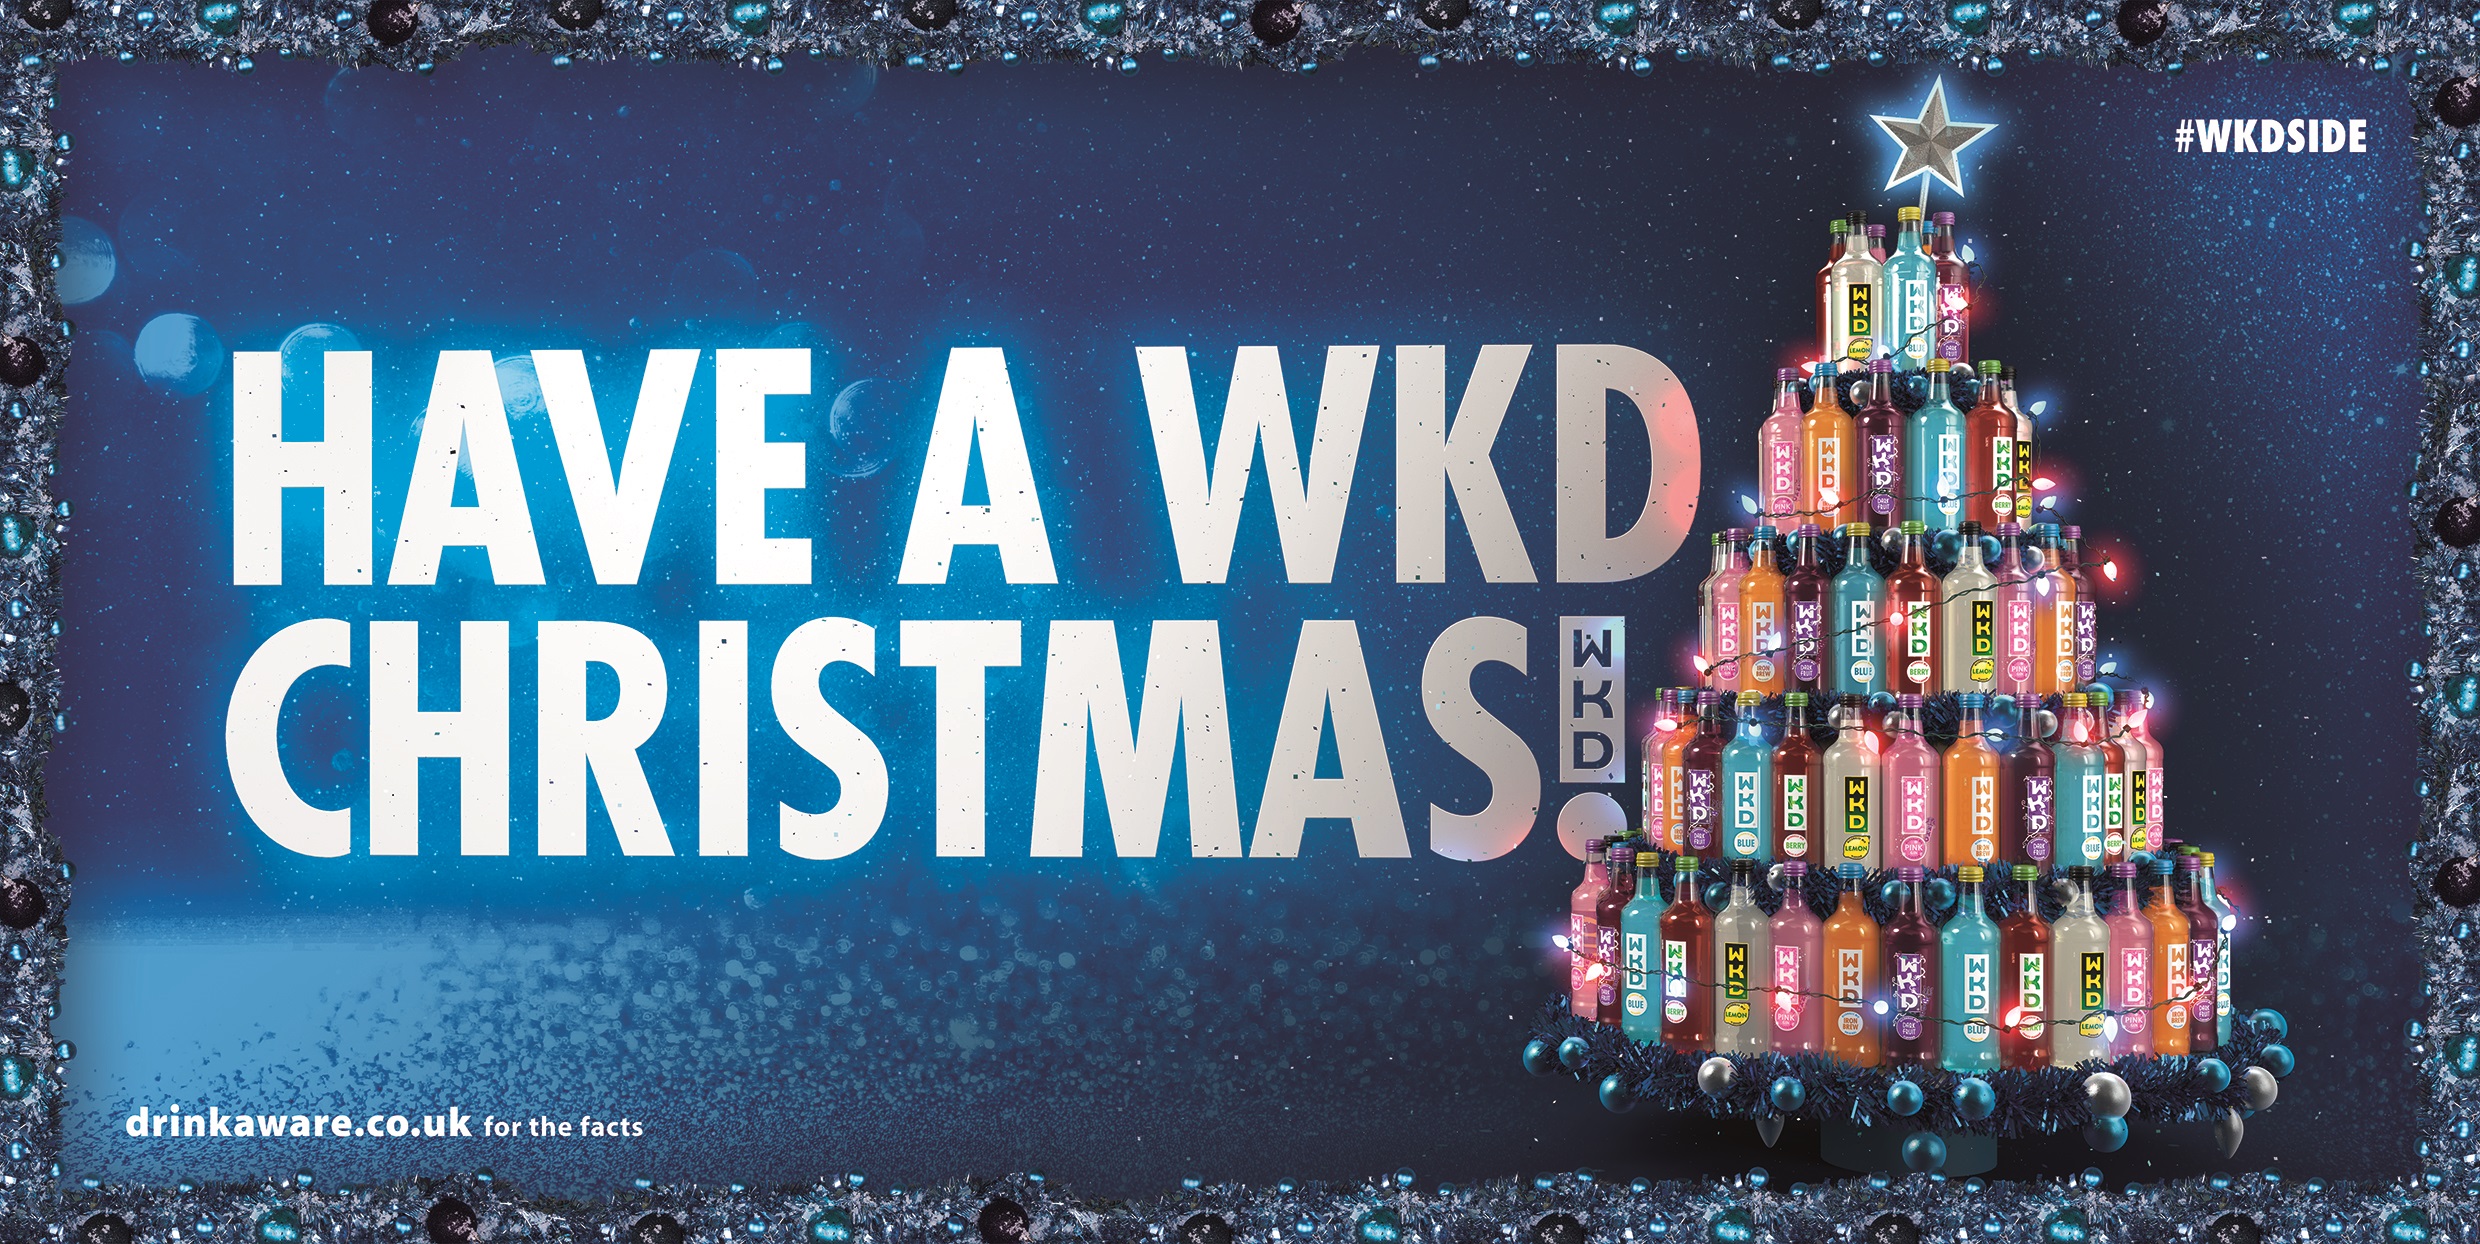 WKD Outdoor and Social Media campaigns offer Xmassive Prizes